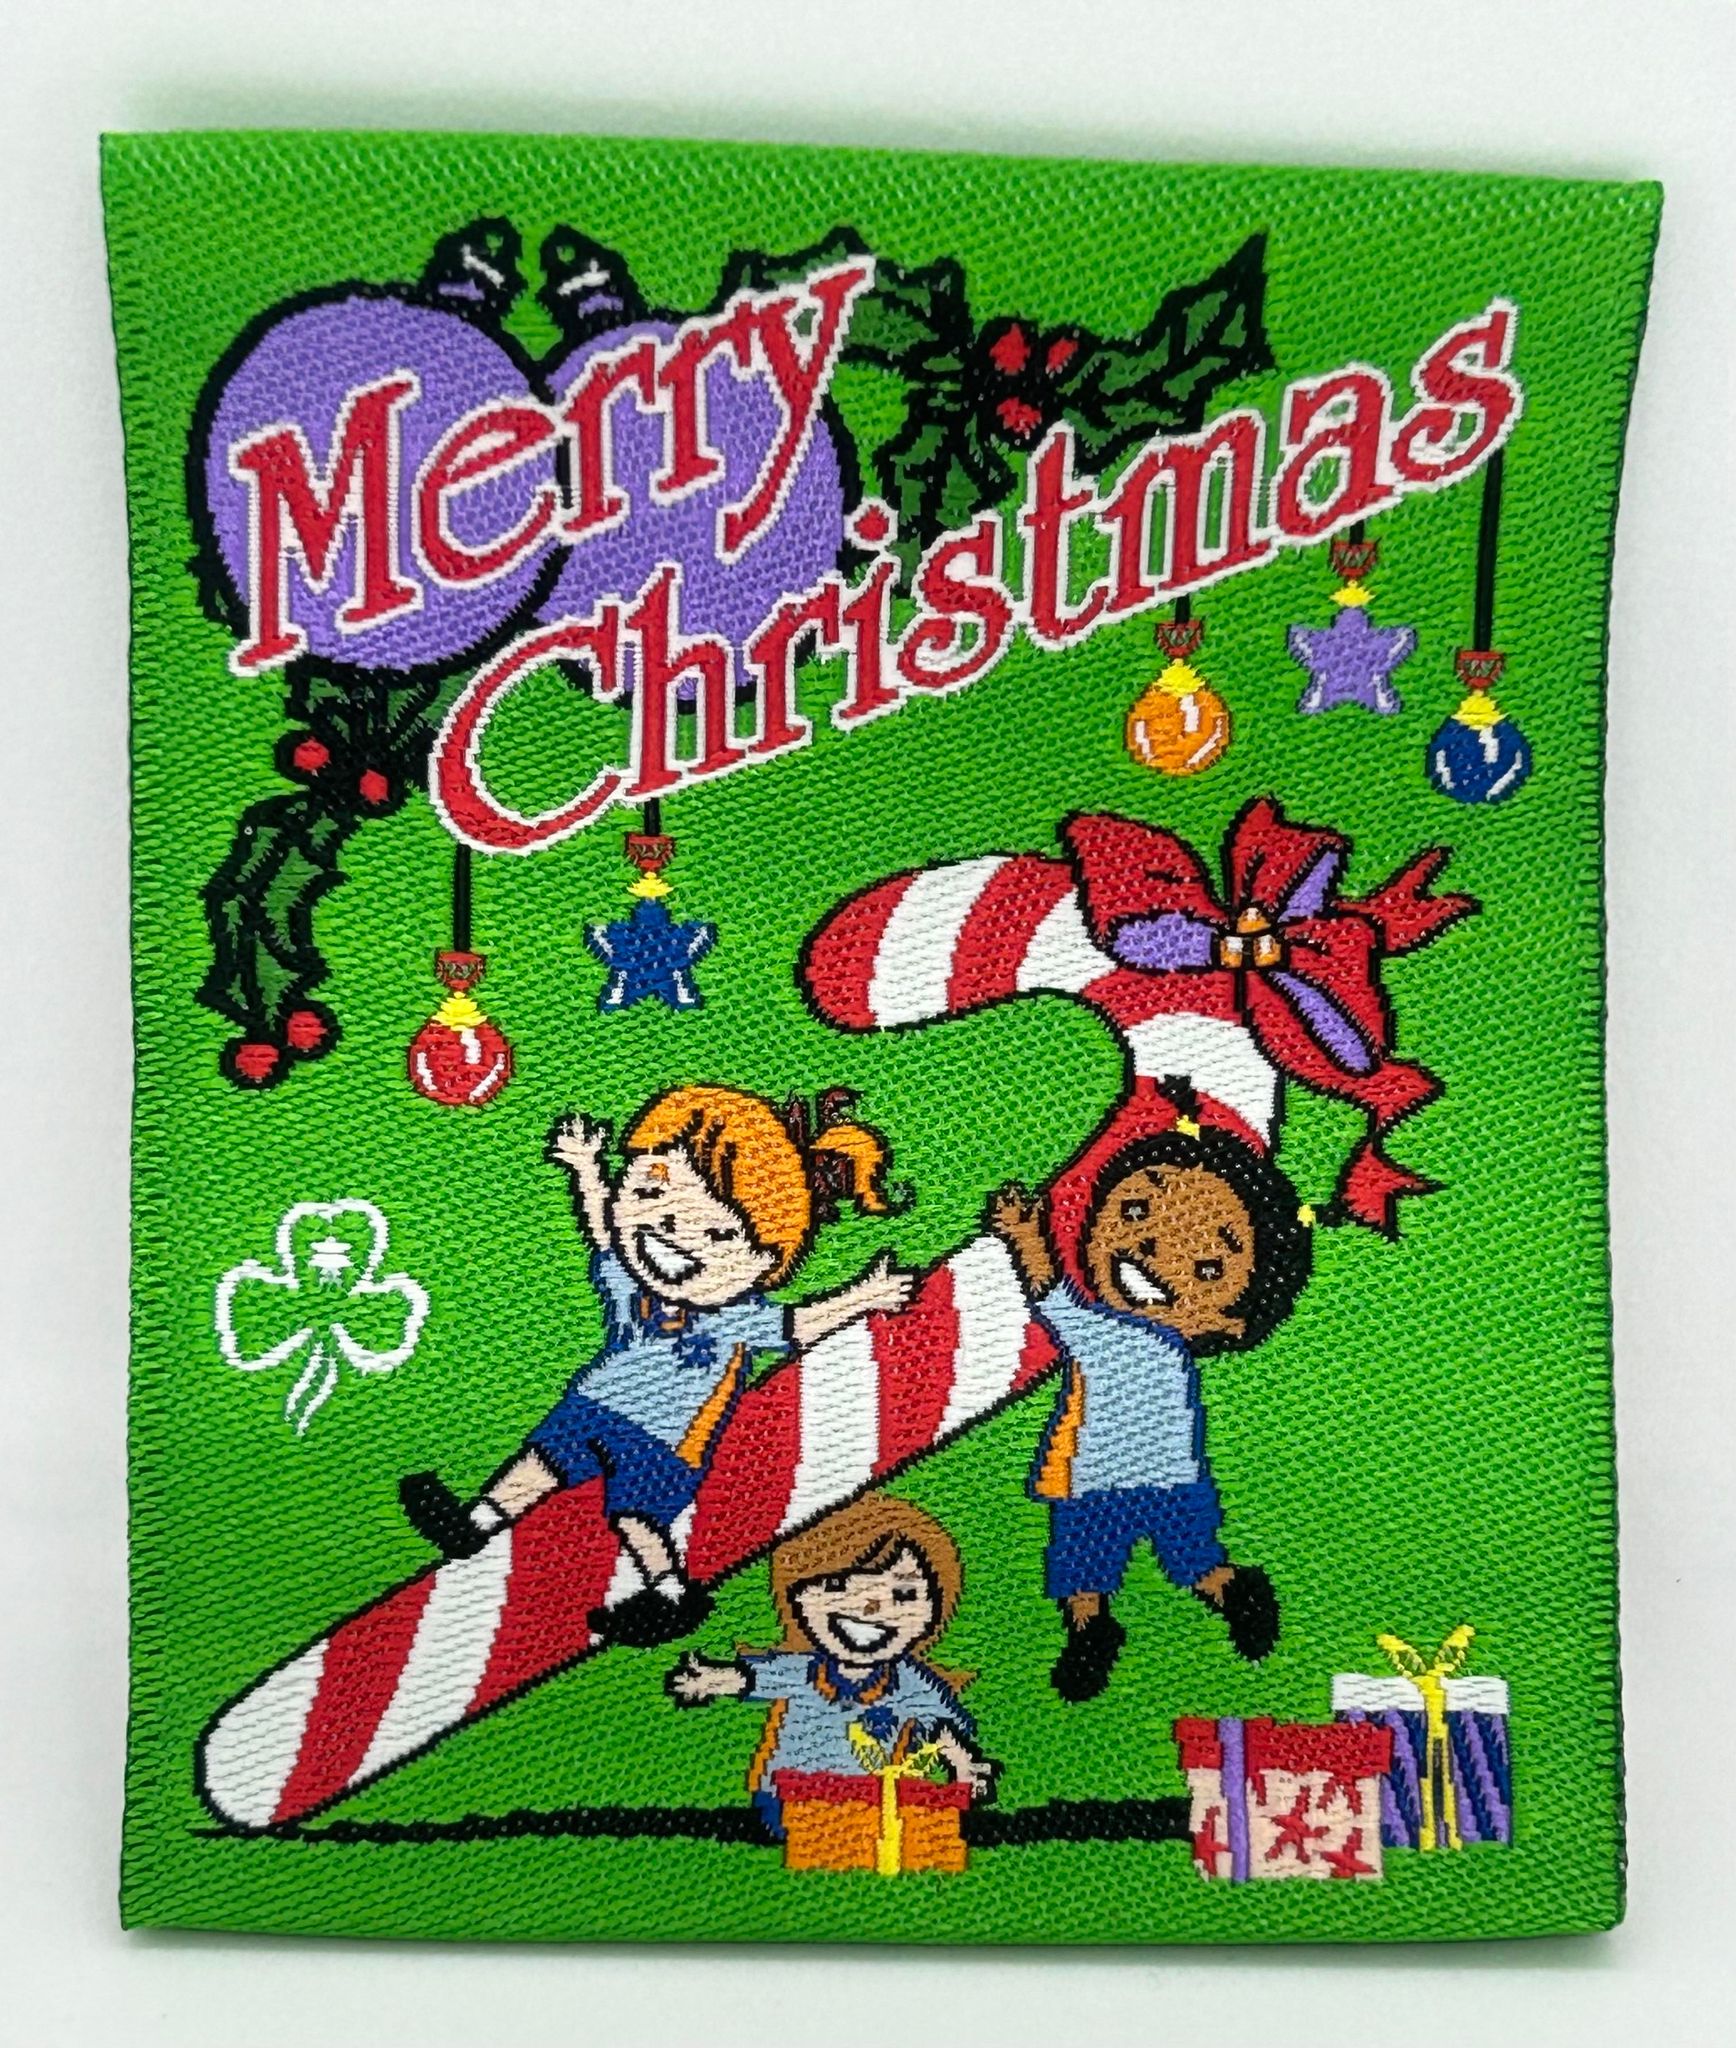 a square green unbound badge that has guides, presents, decorations and a candy cane